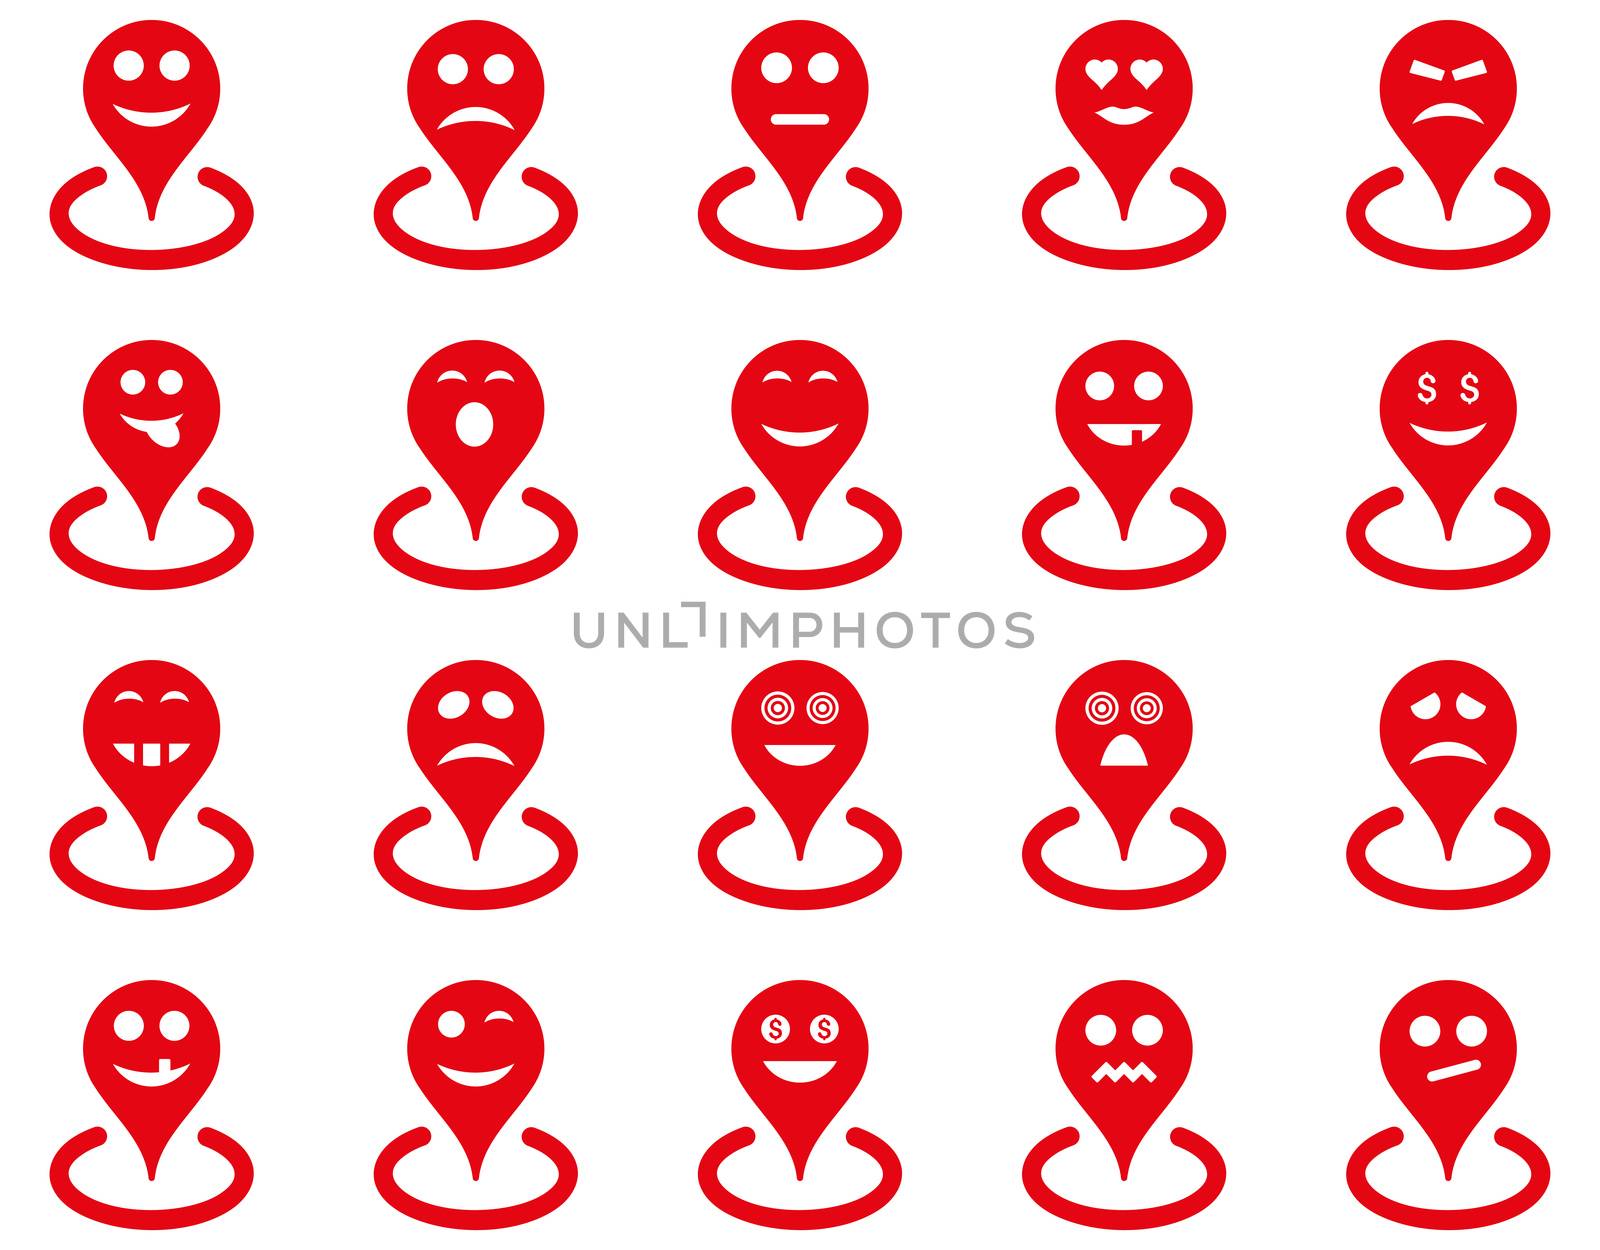 Smiled location icons. Glyph set style is flat images, red symbols, isolated on a white background.